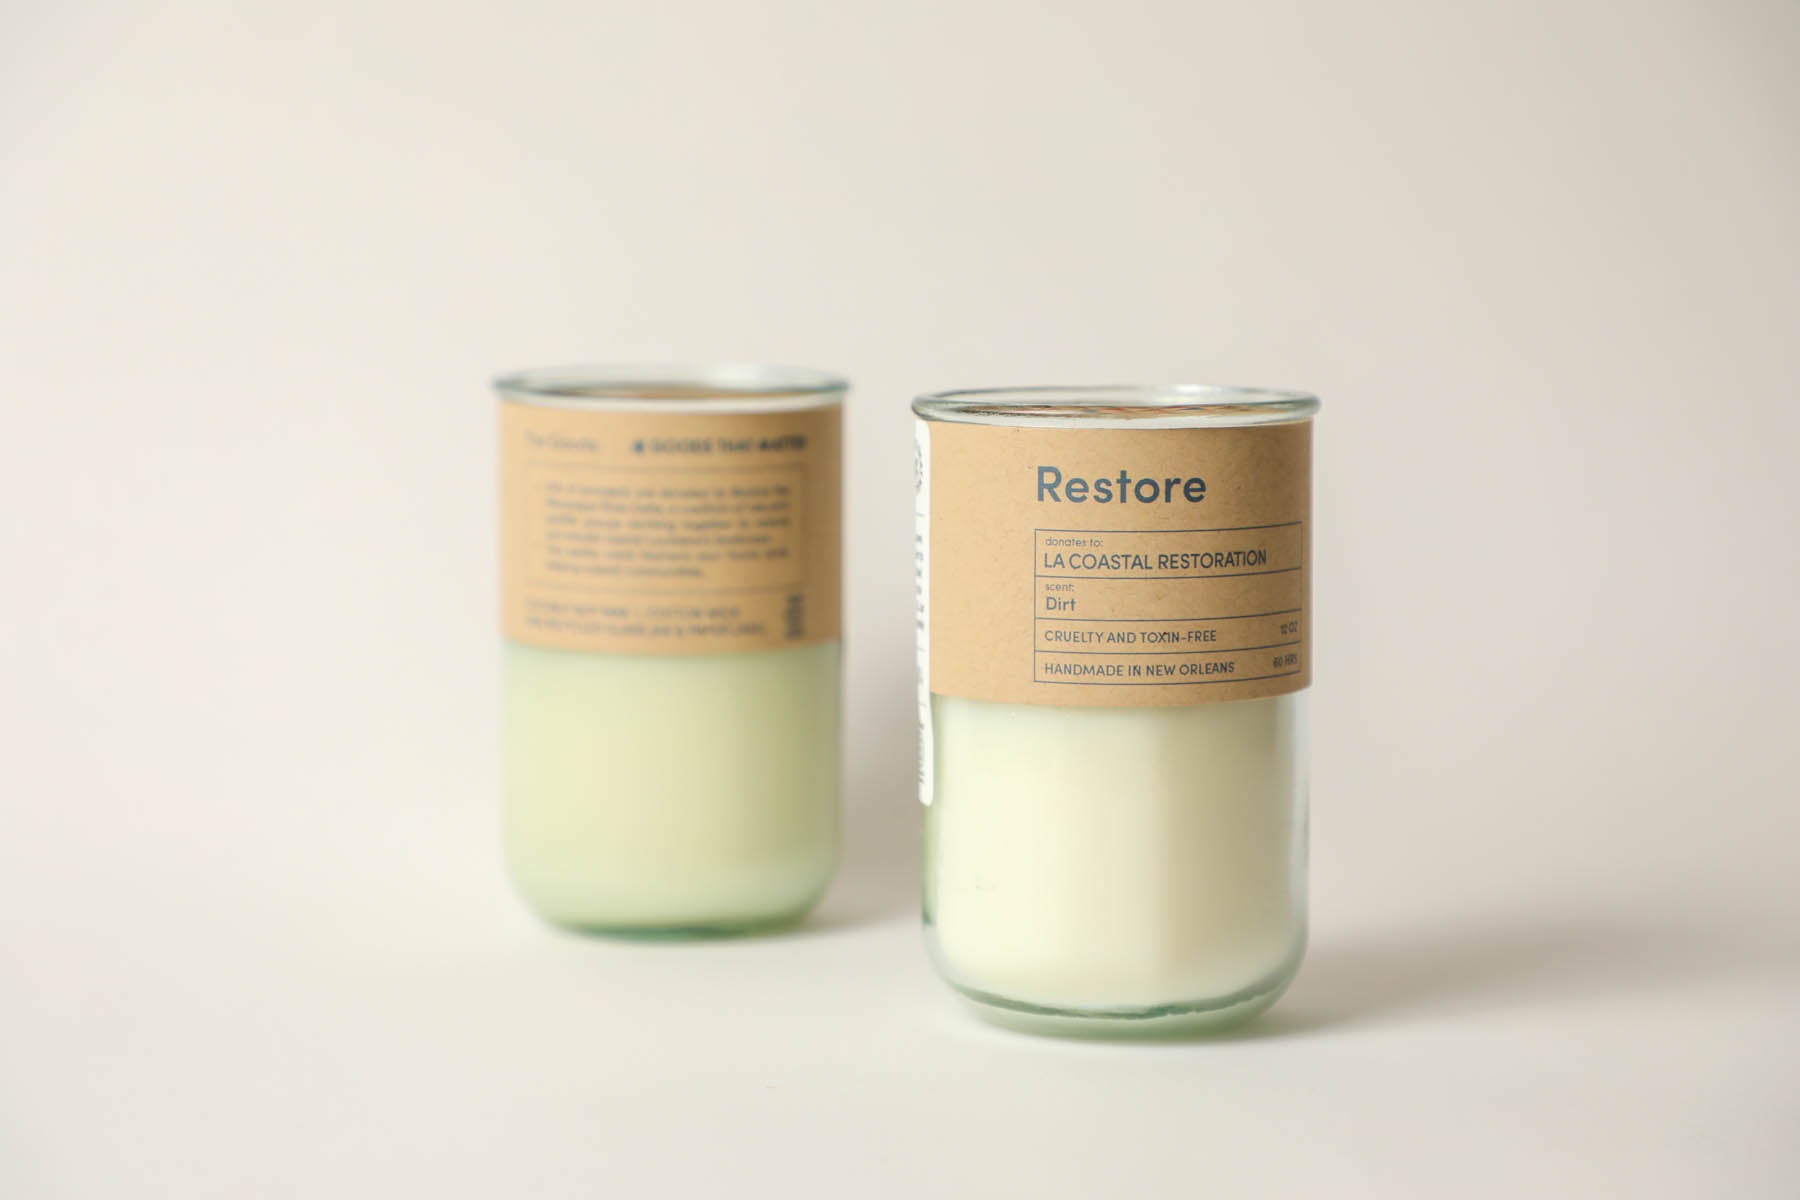 Restore / Dirt Scent: Candles for Good